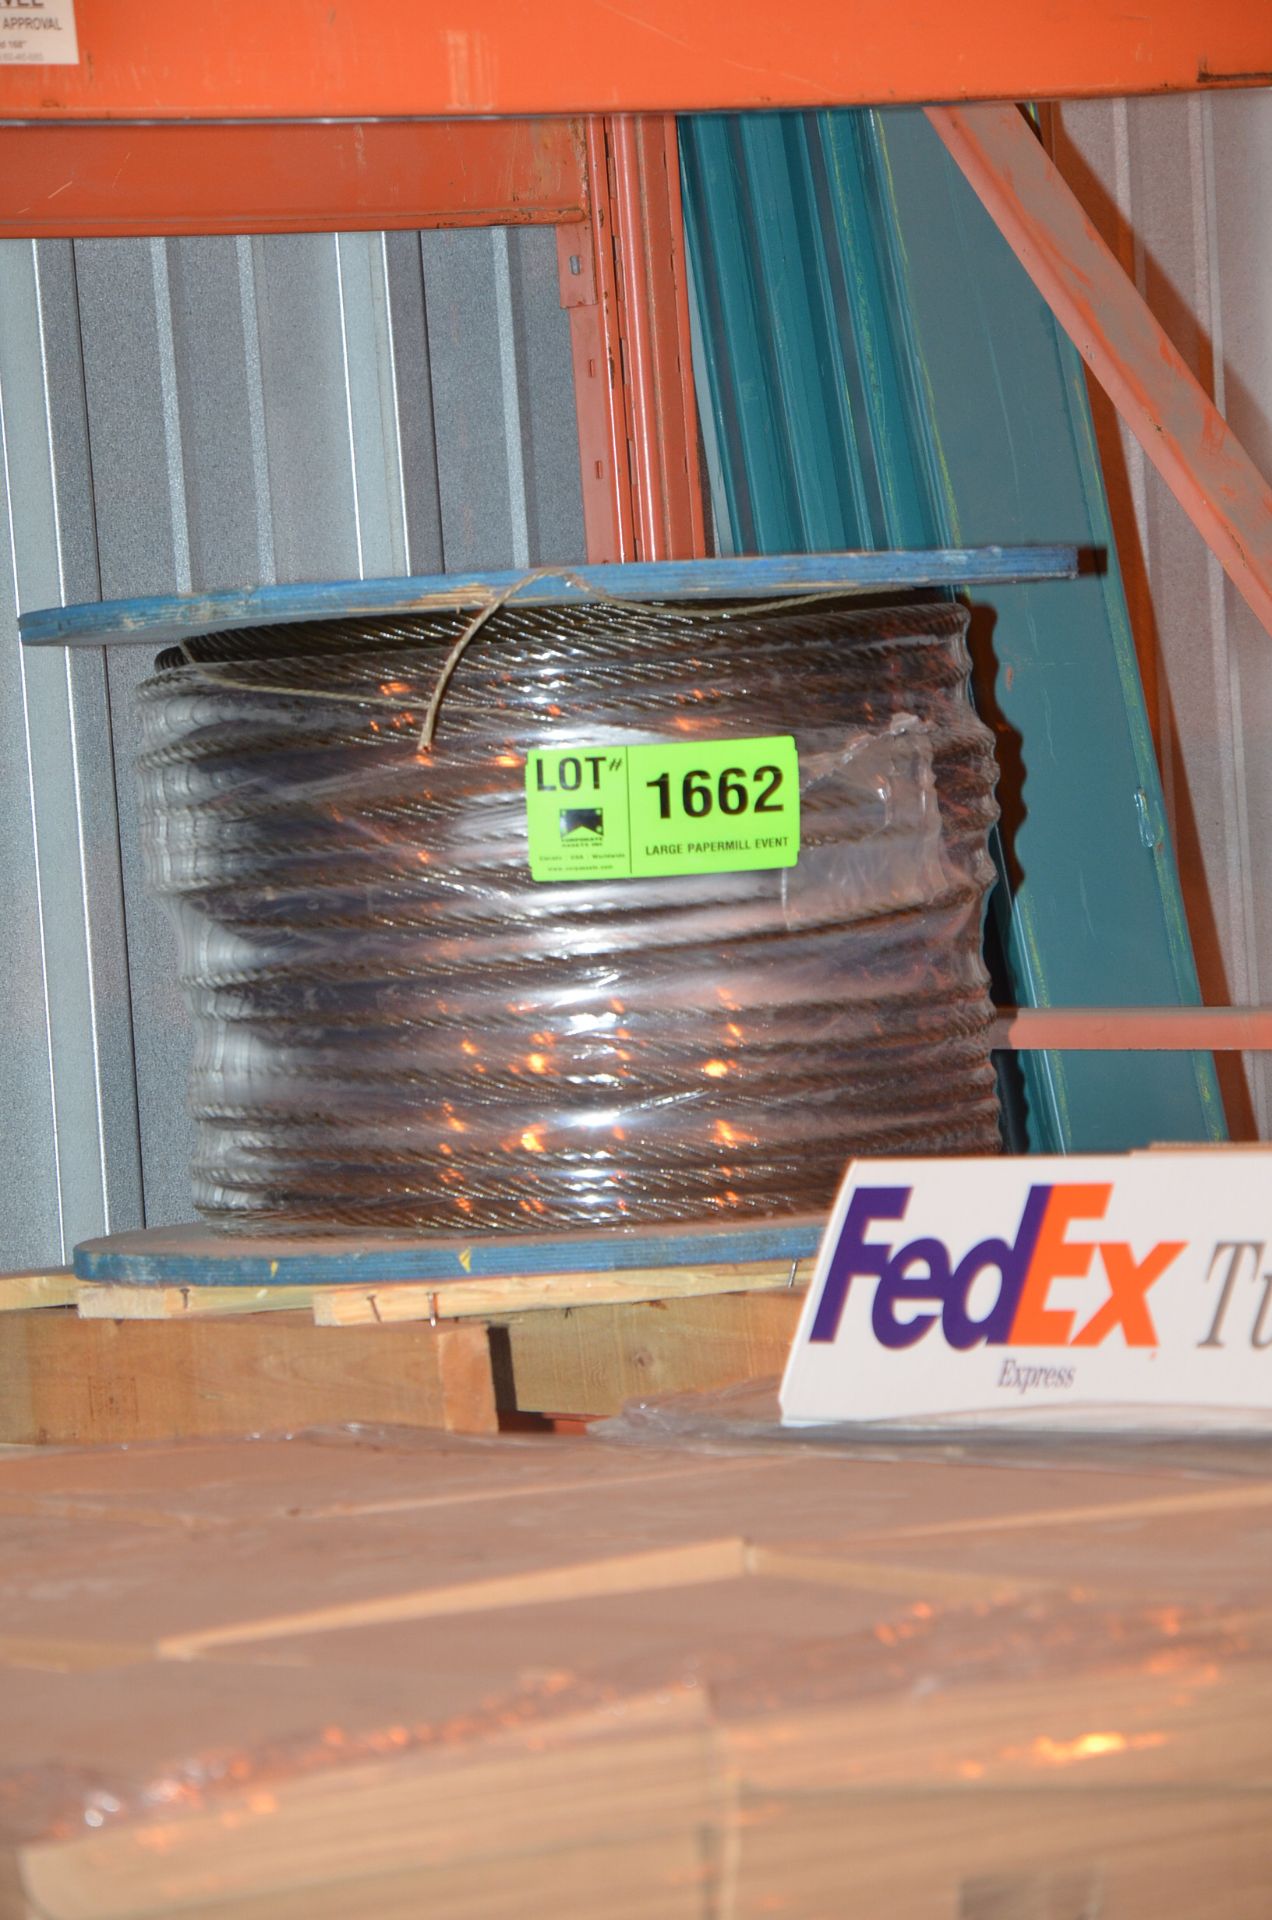 LOT/ (2) SPOOLS OF WIRE ROPE [RIGGING FEES FOR LOT #1662 - $60 USD PLUS APPLICABLE TAXES]